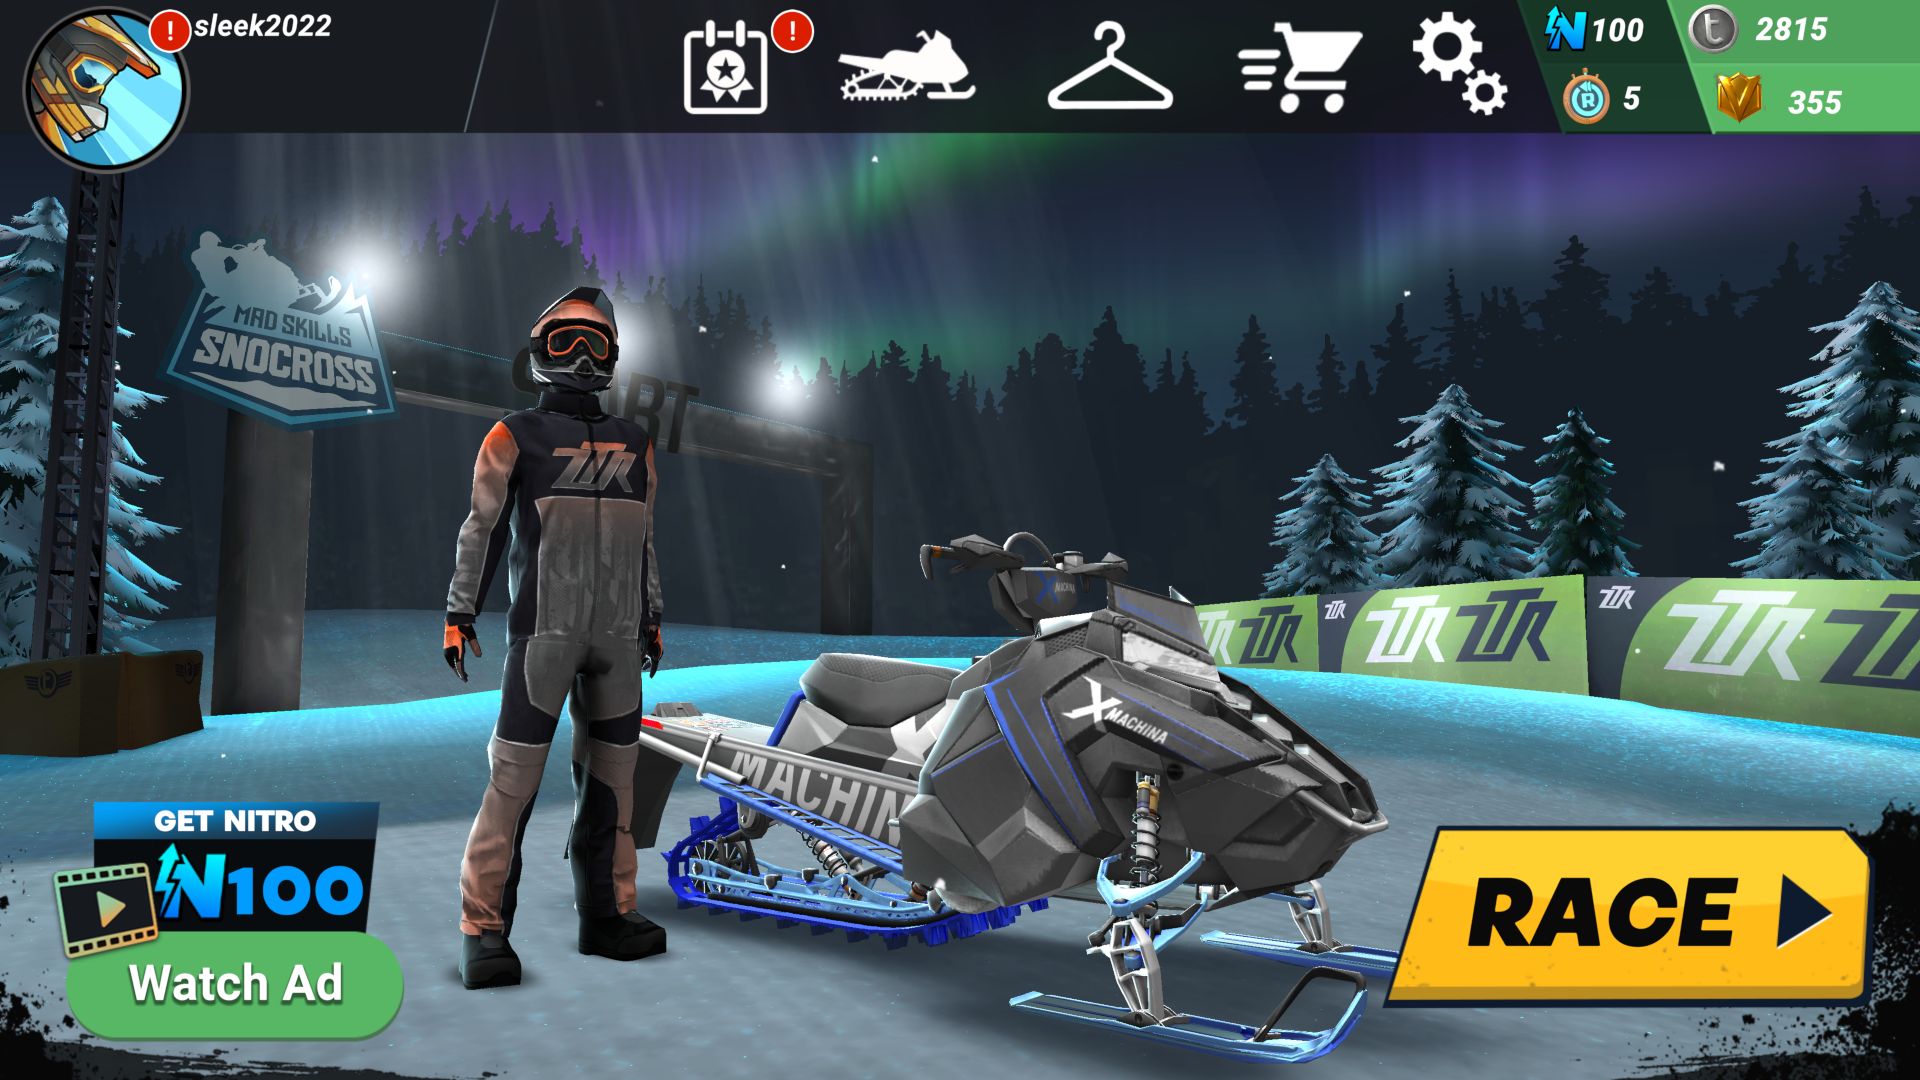 Mad Skills Snocross - Android game screenshots.